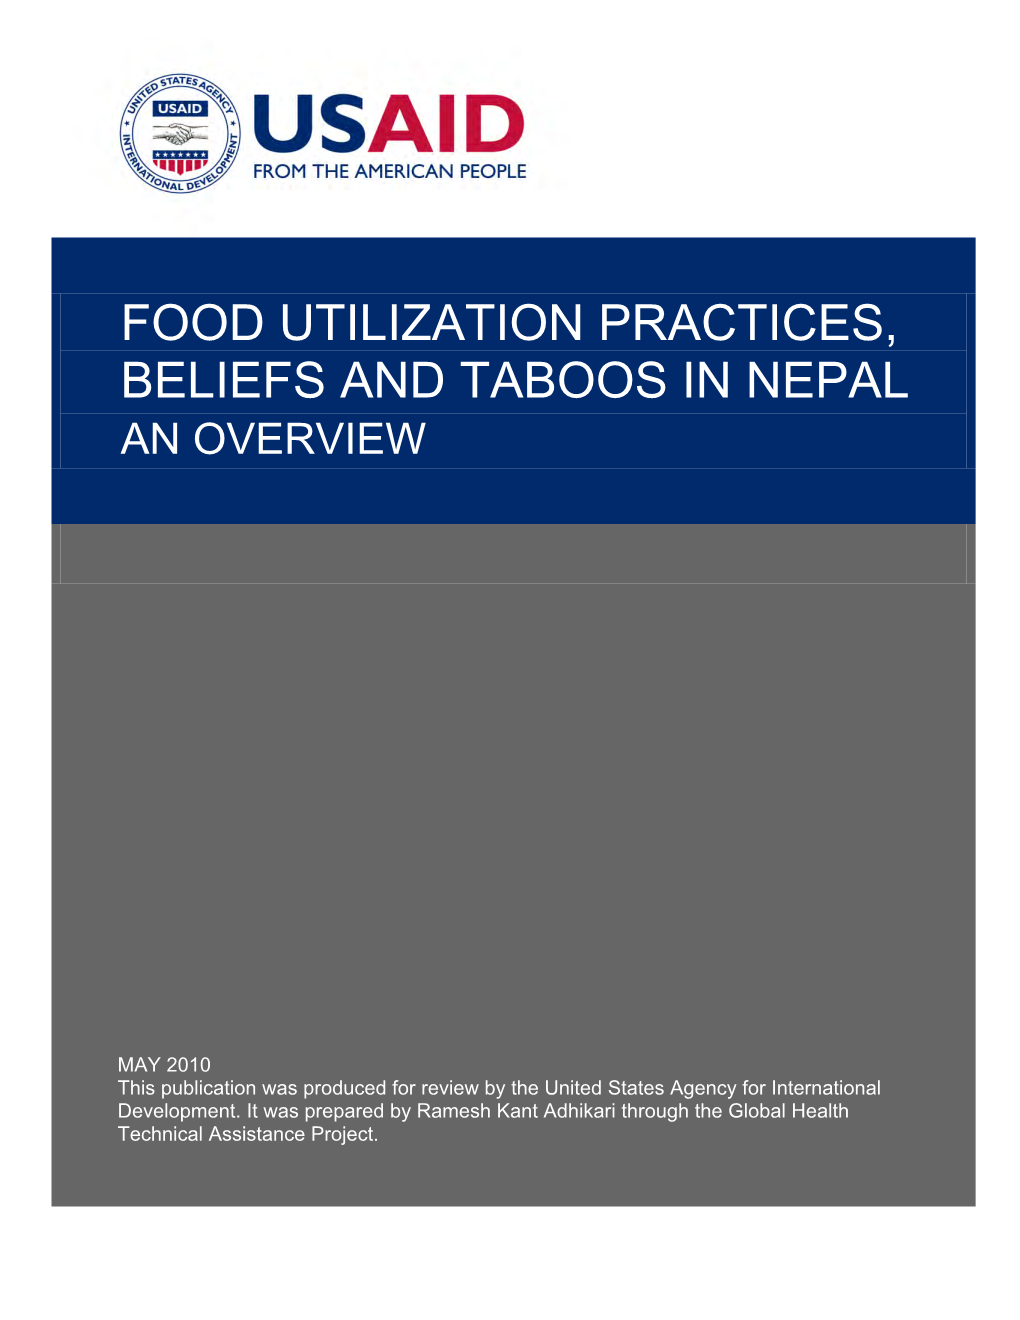 Food Utilization Practices, Beliefs and Taboos in Nepal an Overview